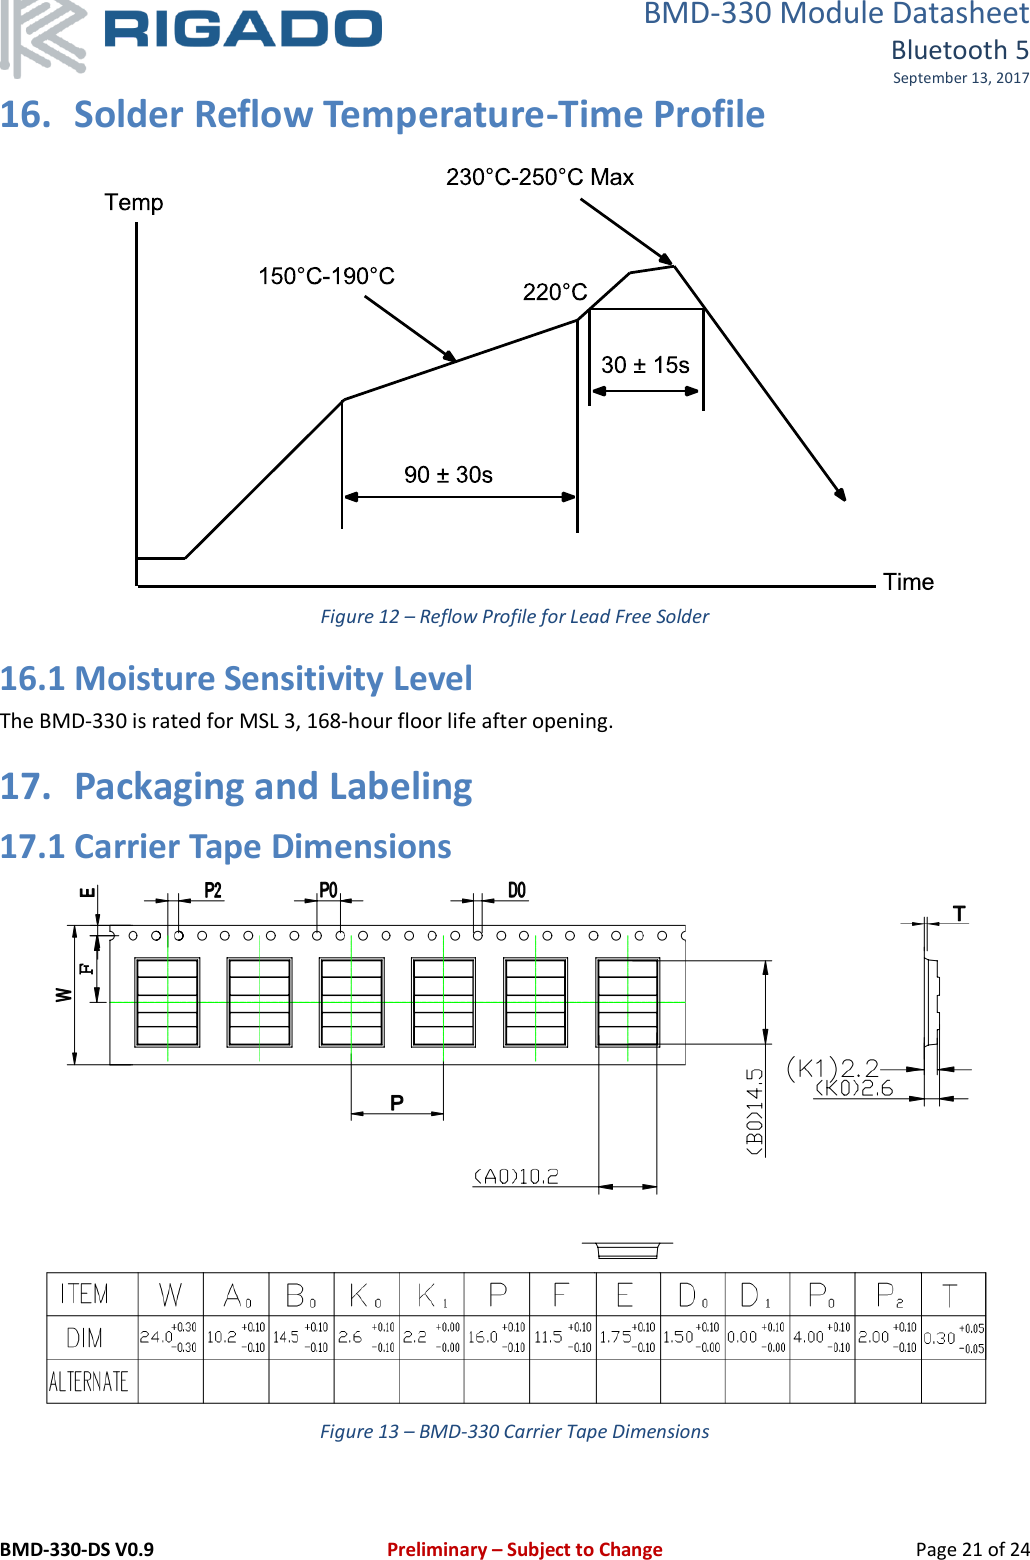 BMD-330 Module Datasheet Bluetooth 5 September 13, 2017 BMD-330-DS V0.9     Preliminary – Subject to Change   Page 21 of 24 16. Solder Reflow Temperature-Time Profile  Figure 12 – Reflow Profile for Lead Free Solder 16.1 Moisture Sensitivity Level The BMD-330 is rated for MSL 3, 168-hour floor life after opening. 17. Packaging and Labeling 17.1 Carrier Tape Dimensions  Figure 13 – BMD-330 Carrier Tape Dimensions  